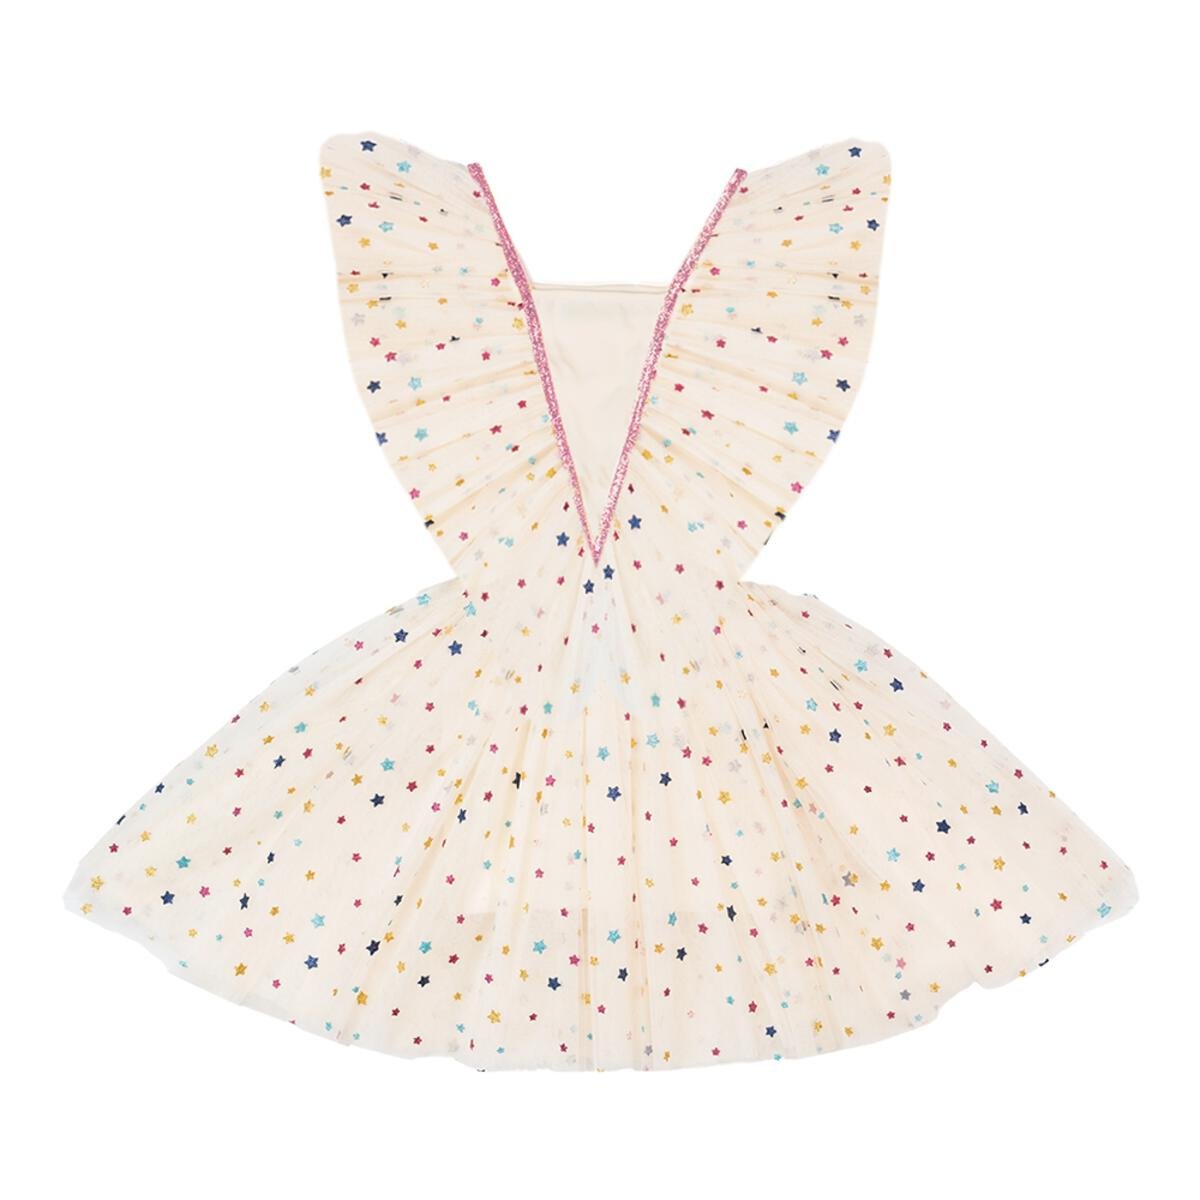 STARS ANGEL DRESS (PREORDER) - ROCK YOUR BABY